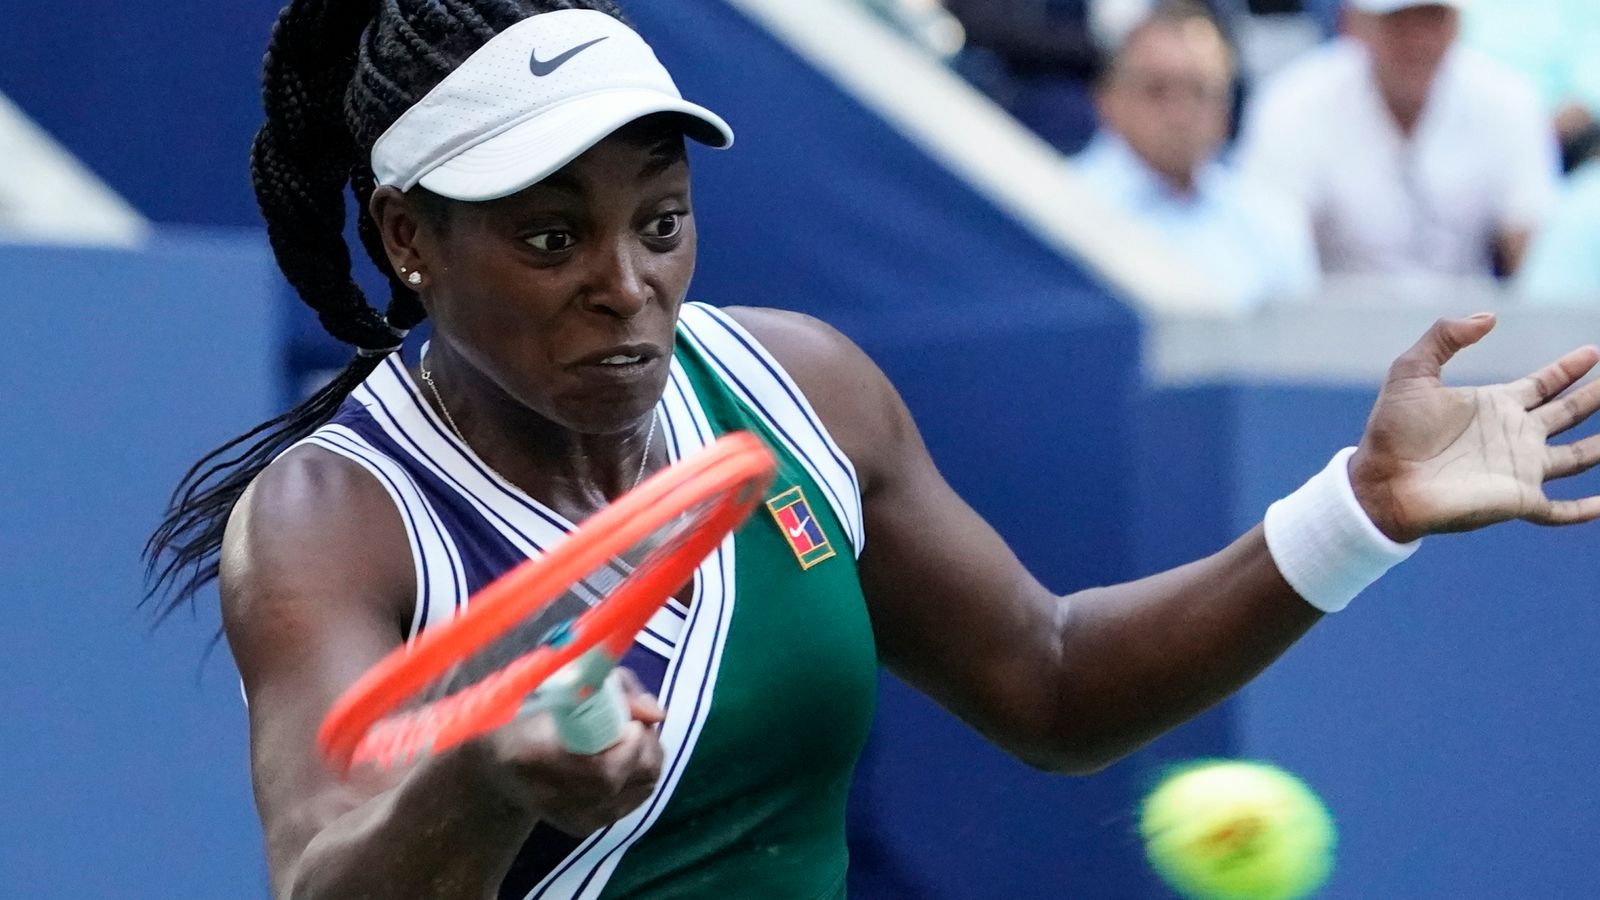 What Is American Tennis Player Sloane Stephens Religion?